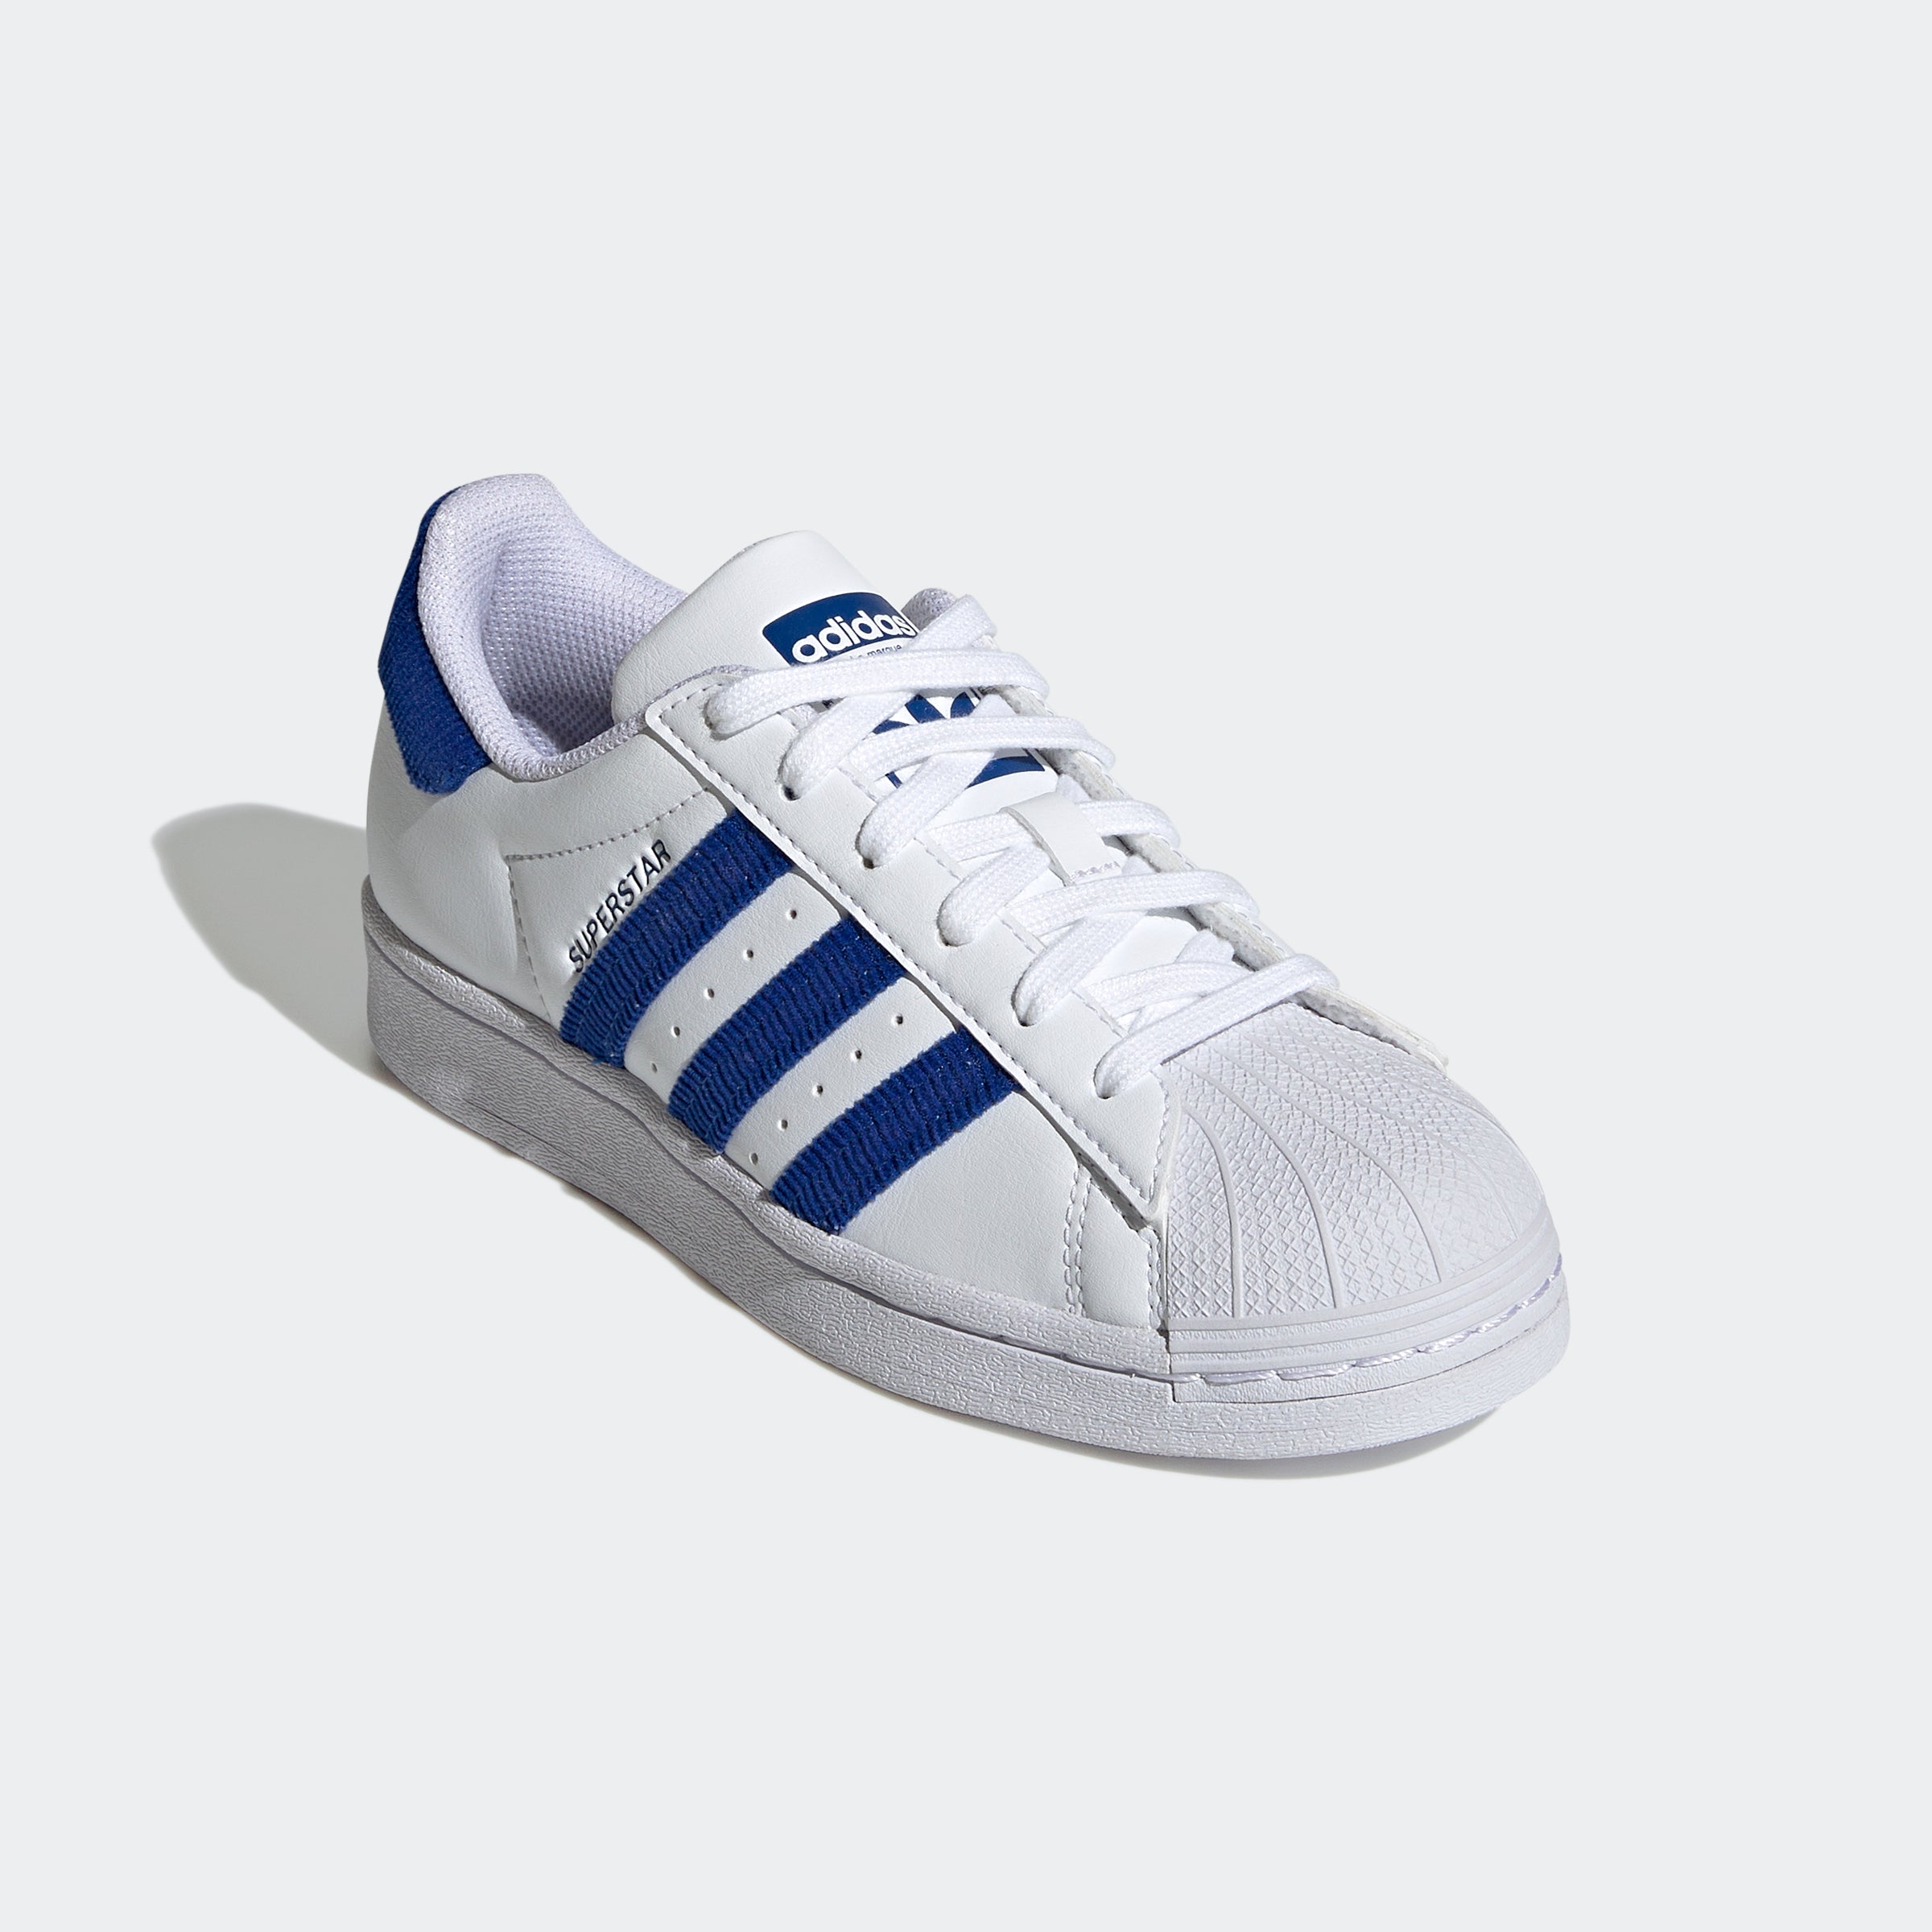 Socialistisch Dosering Gouverneur Kids' adidas Superstar Shoes White Royal Blue | Chicago City Sports